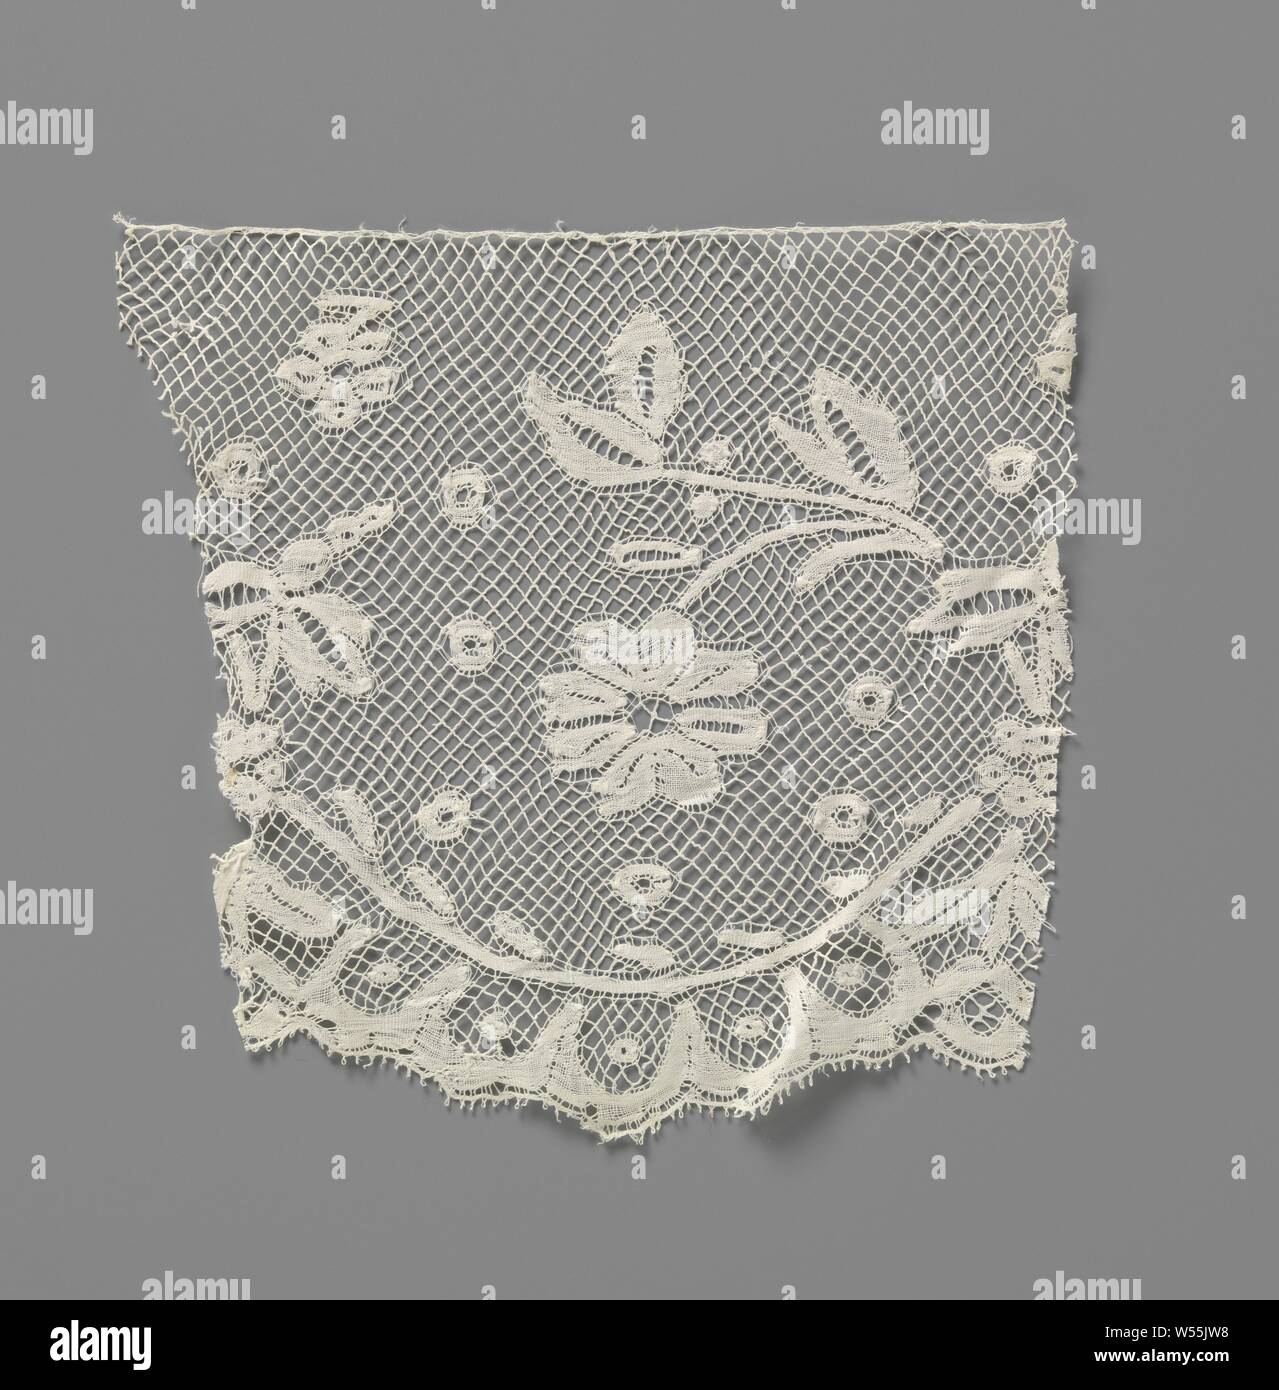 Strip of bobbin lace with goddessed shells, Natural strip of bobbin lace: Valenciennes lace. Pattern with goddess semi-circular scallops, above which a hanging daisy among 'sequins'., anonymous, Belgium (possibly), c. 1875 - c. 1899, linen (material), Valenciennes lace, l 13 cm × w 13.5 cm ×, 11 cm Stock Photo